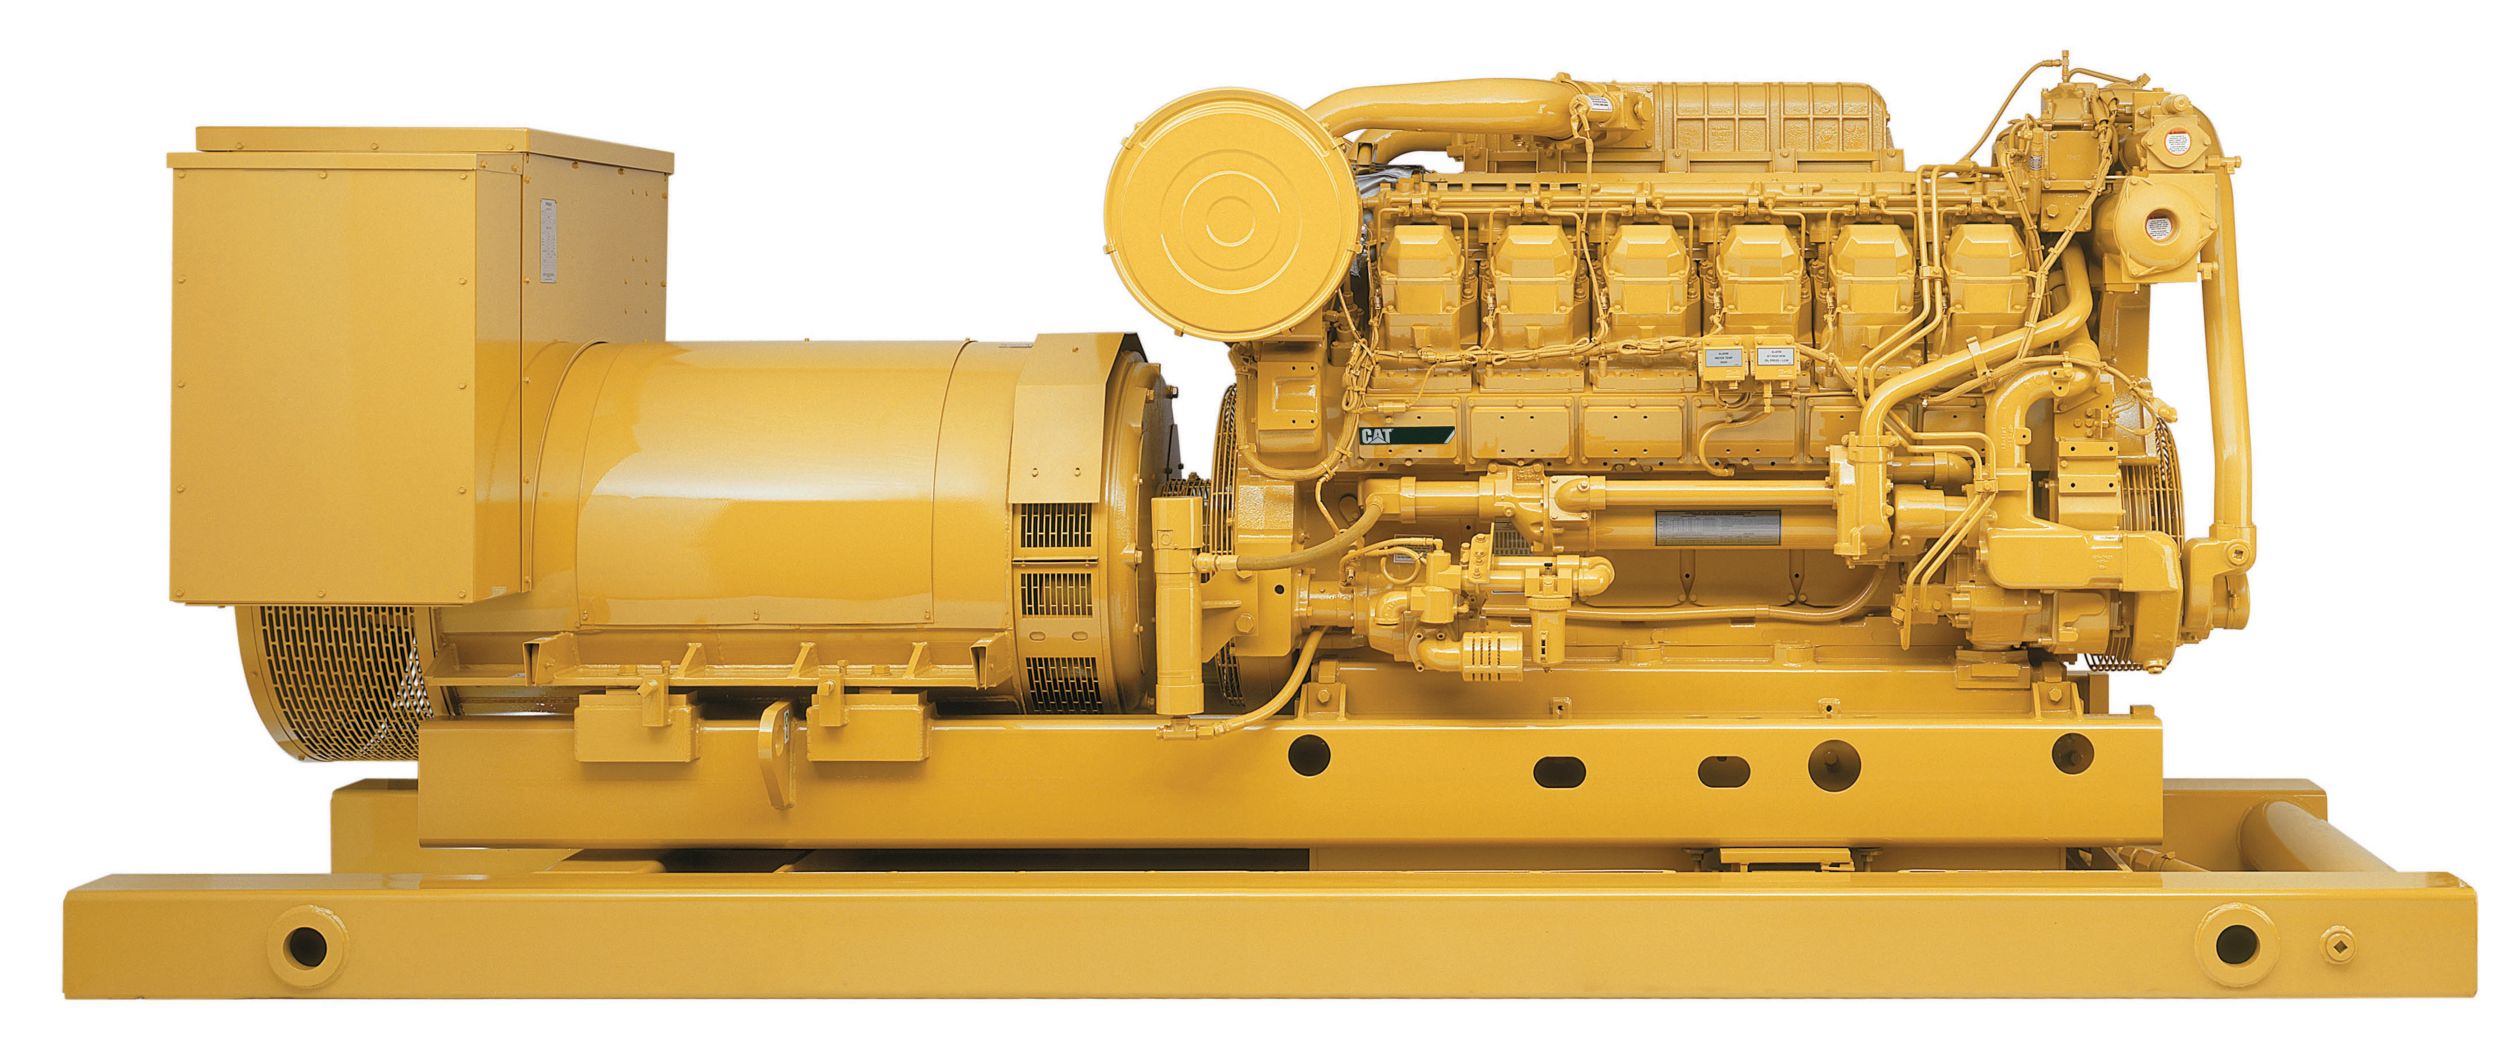 3512B Offshore Drilling and Production Generator Sets | Cat Caterpillar